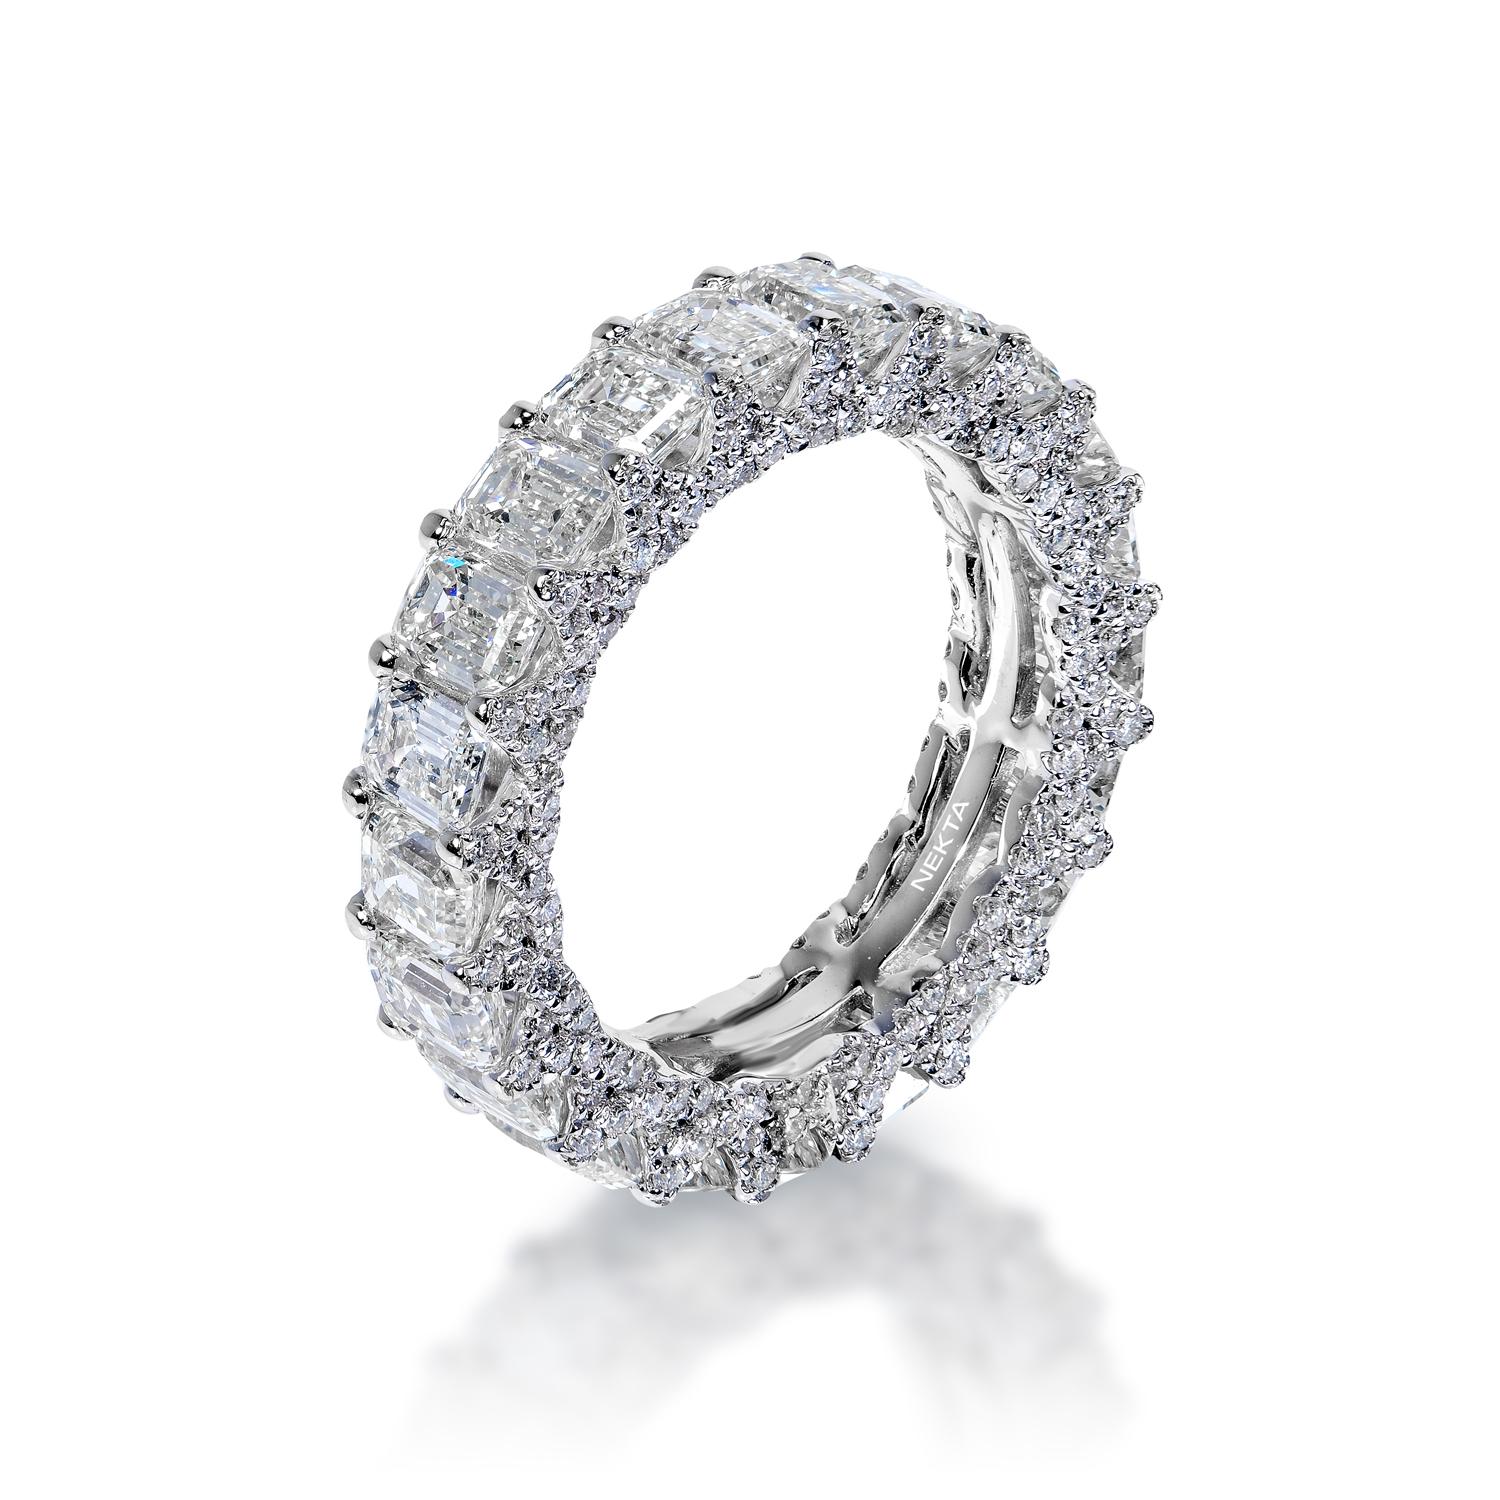 Shared from Emerald Cut eternity band,with diamond encrusted prongs



Diamond:
Carat Weight: 4.76 Carats
Style: Emerald Cut

Accent Diamonds:
Carat Weight: 0.73 Carats
Shape: Round Brilliant Cut
Setting: Shared Prong & Pave
Metal: 14 Karat White